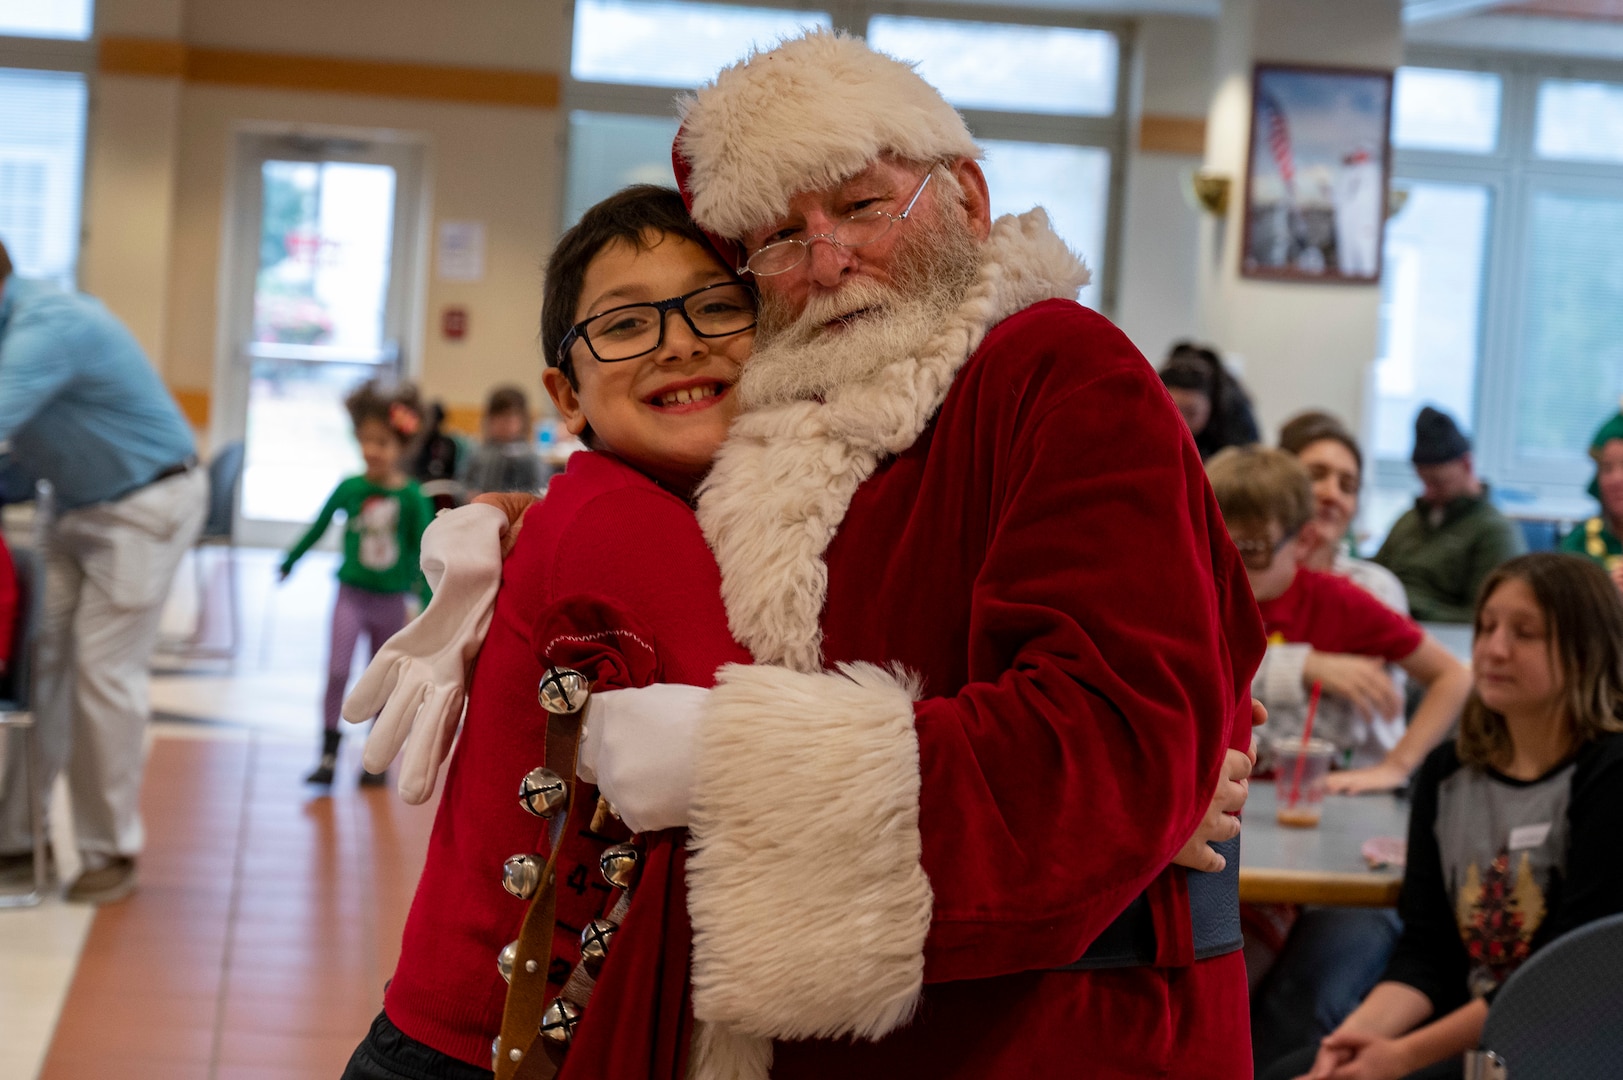 Santa Claus hugs a pediatric hematology/oncology patient during the children’s holiday party at Naval Medical Center Portsmouth on Dec. 1. NMCP hosted the 21st annual Pediatrics Hematology/Oncology Department Christmas party. (U.S. Navy Photo by Mass Communication Specialist 2nd Class Deven Fernandez).